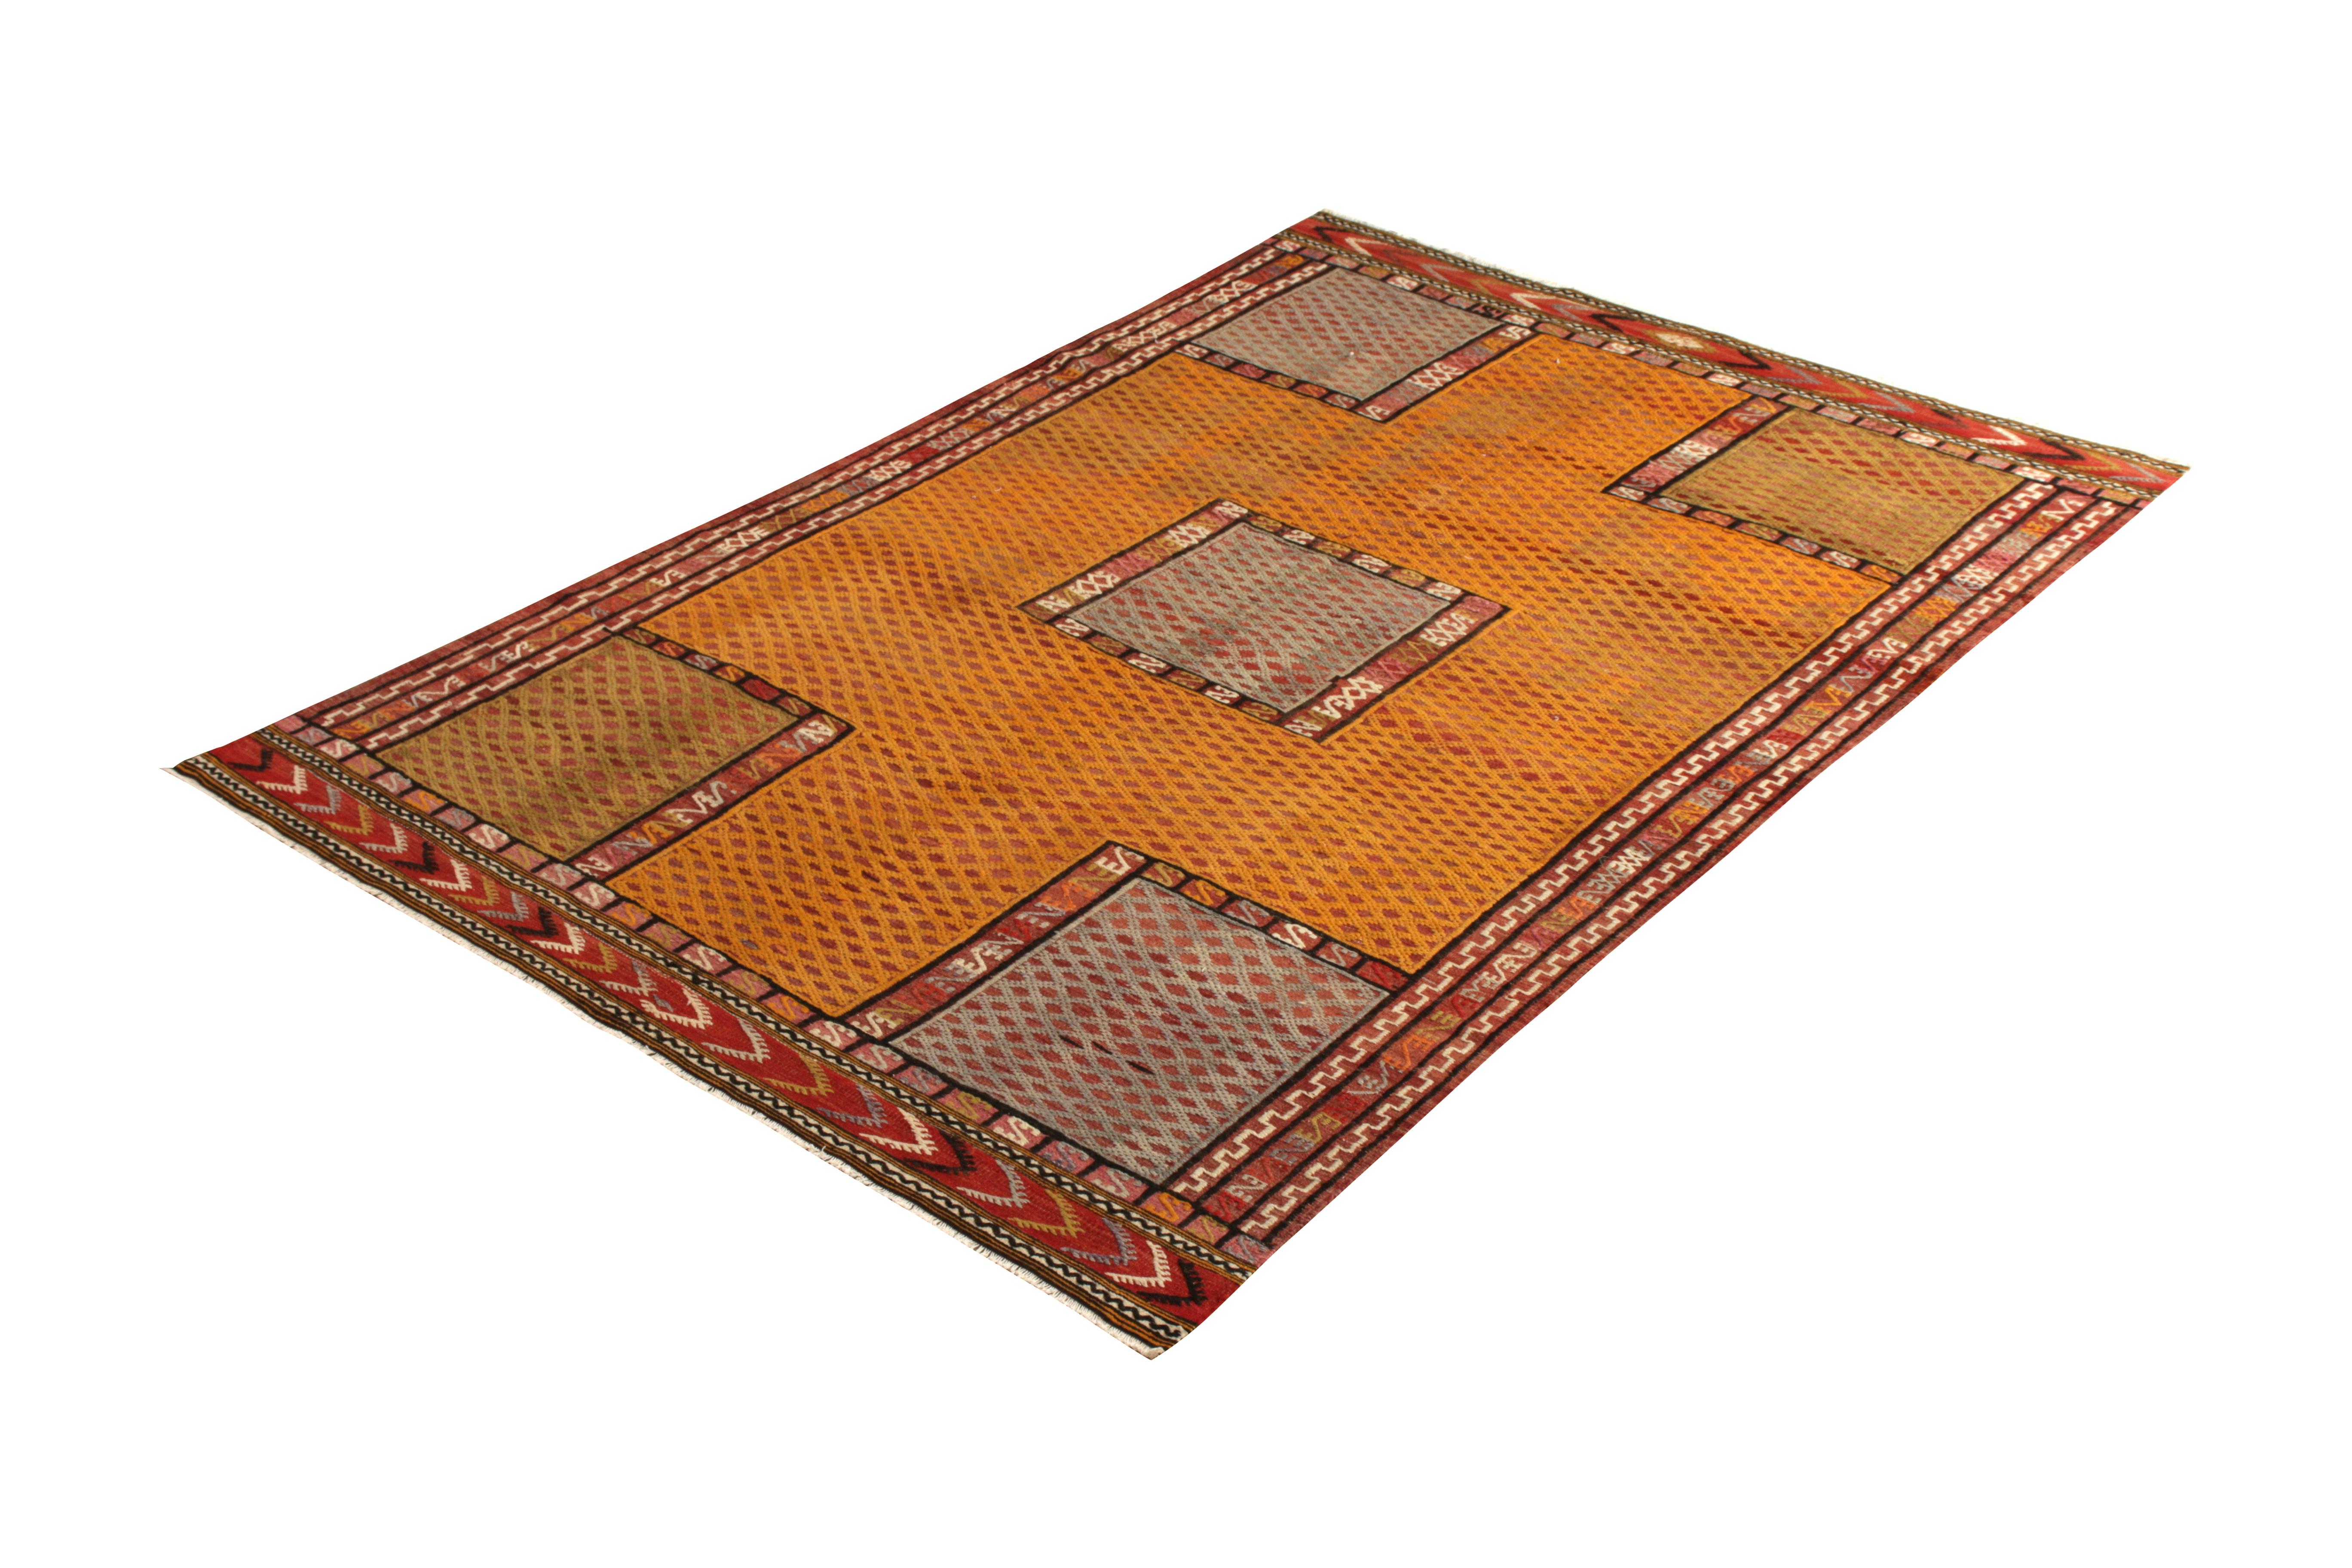 Handwoven in wool originating from Turkey circa 1950-1960, this 6’4 x 9’5 rug is a vintage midcentury Kilim rug embellished with a textural flat weaving and embroidery style—offering a natural tactile allure and depth of movement in the play of gold